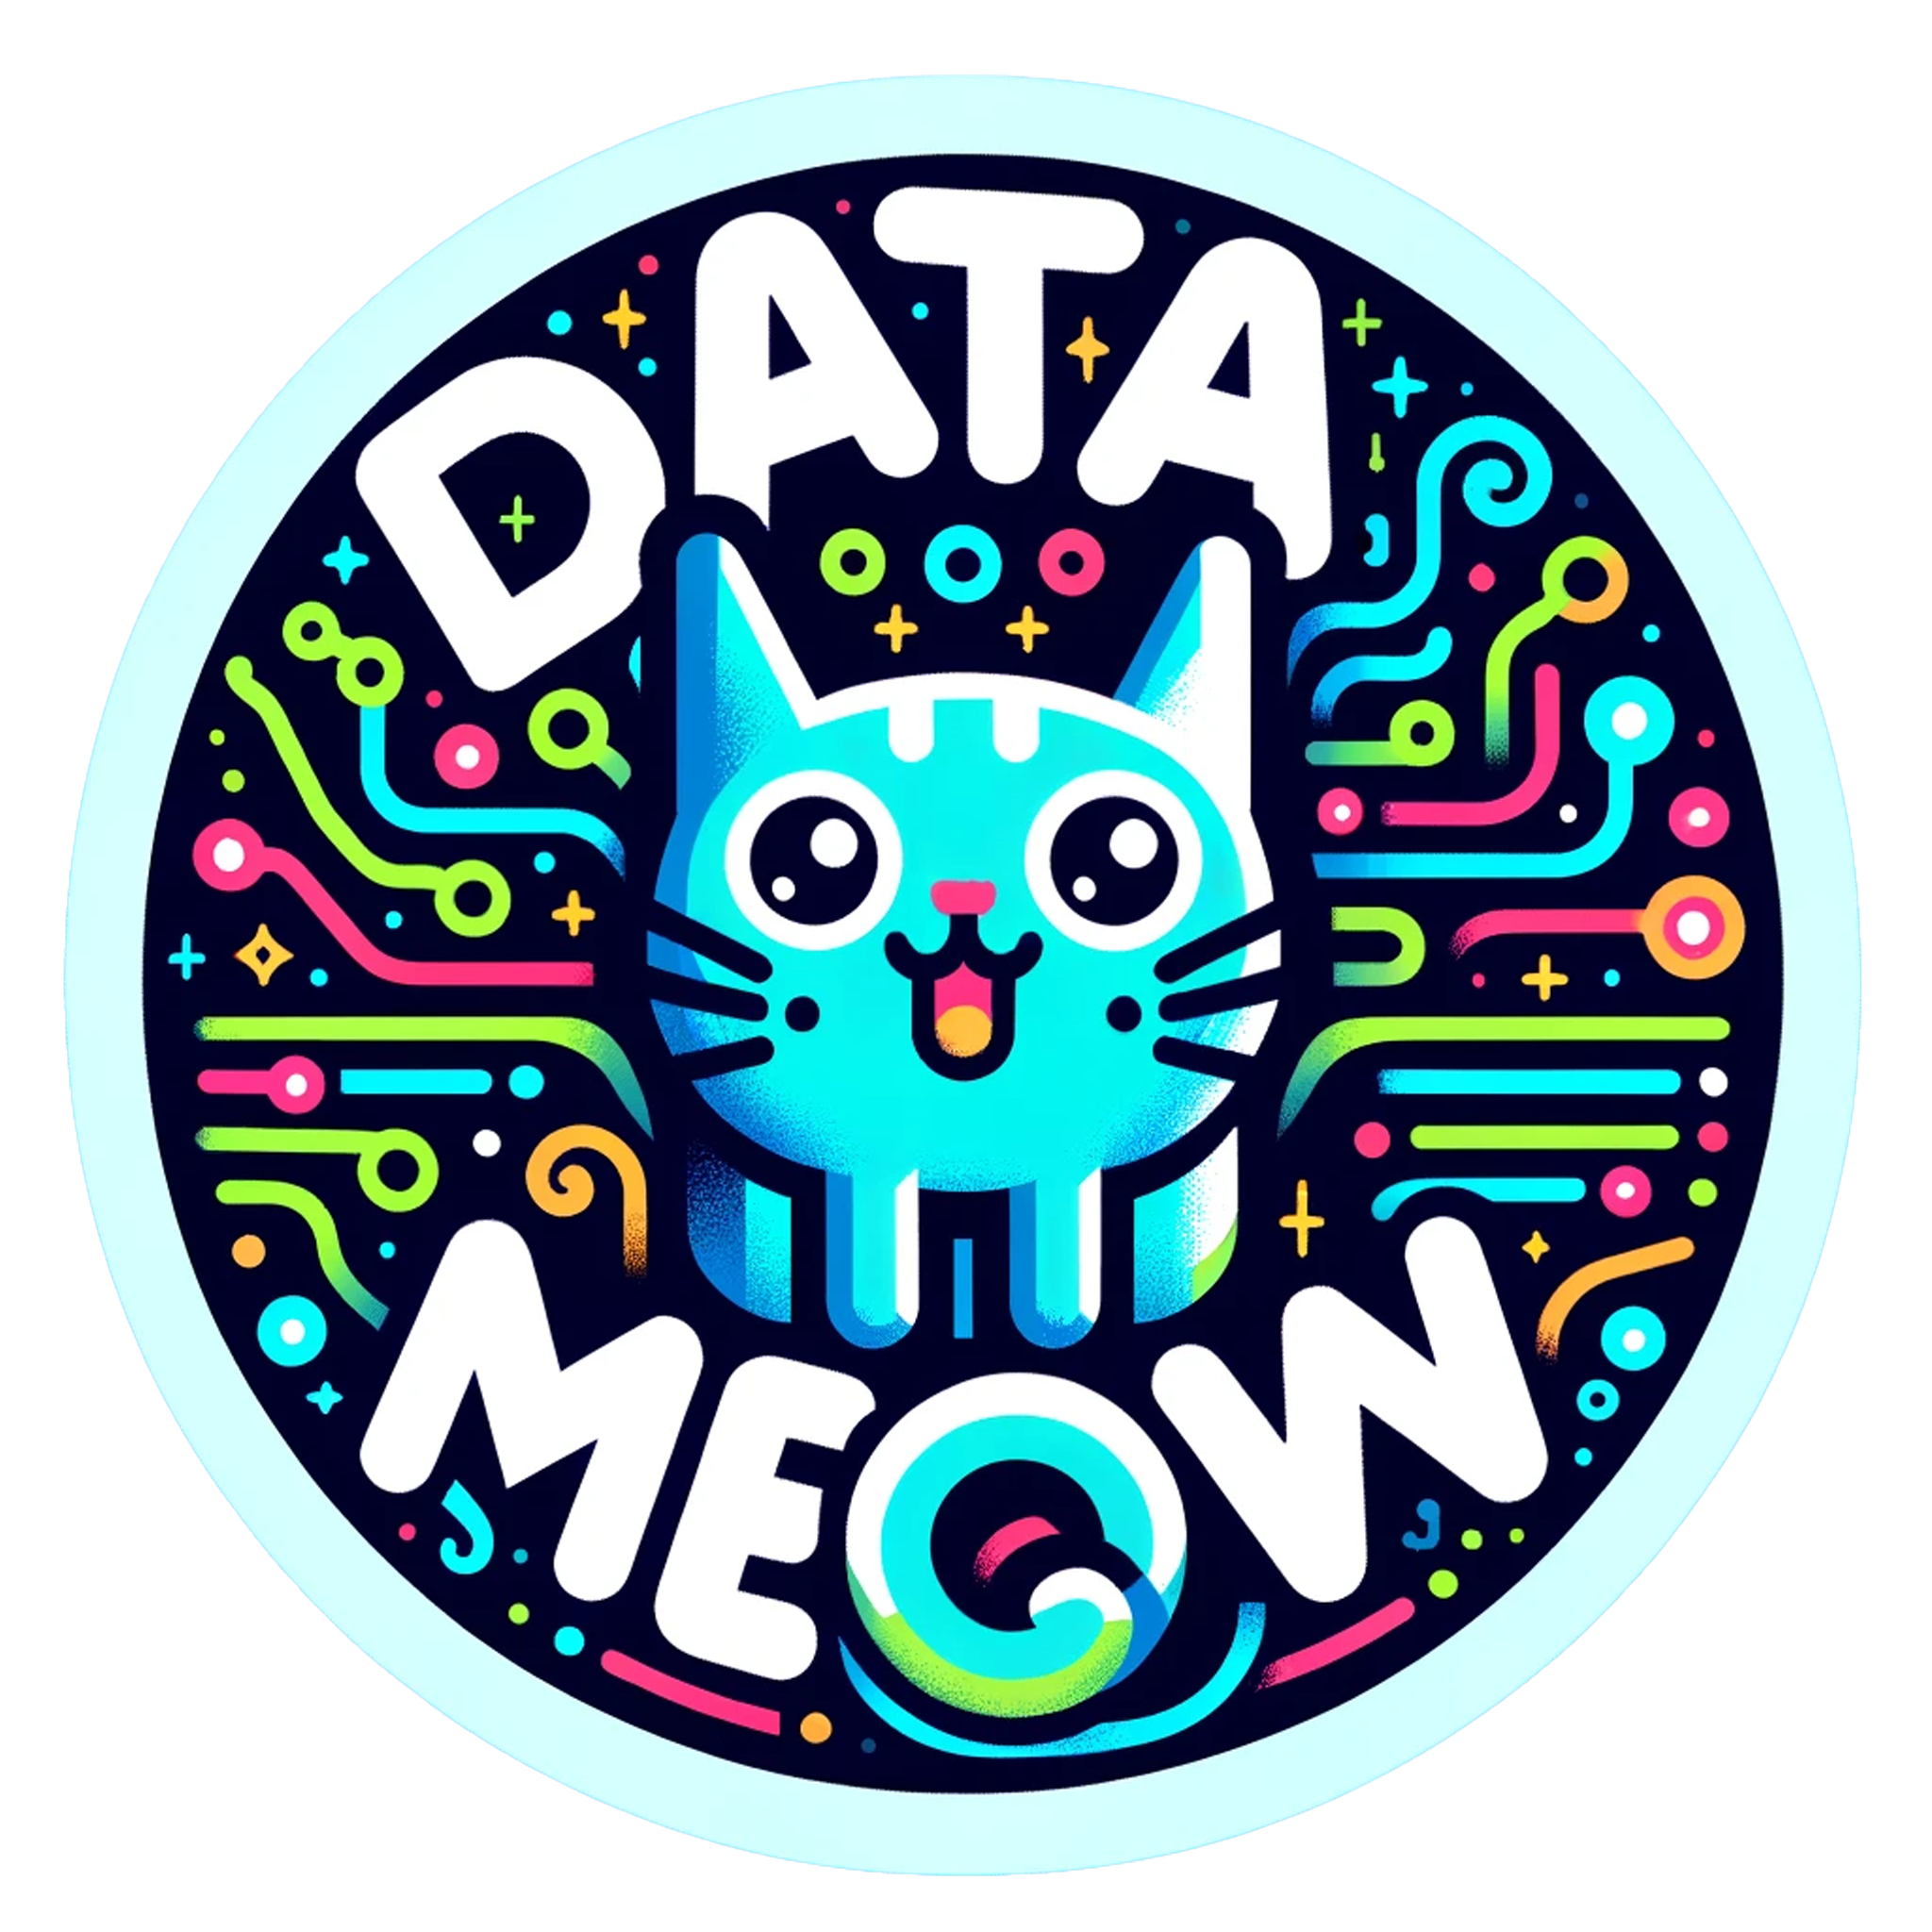 The Data Meow